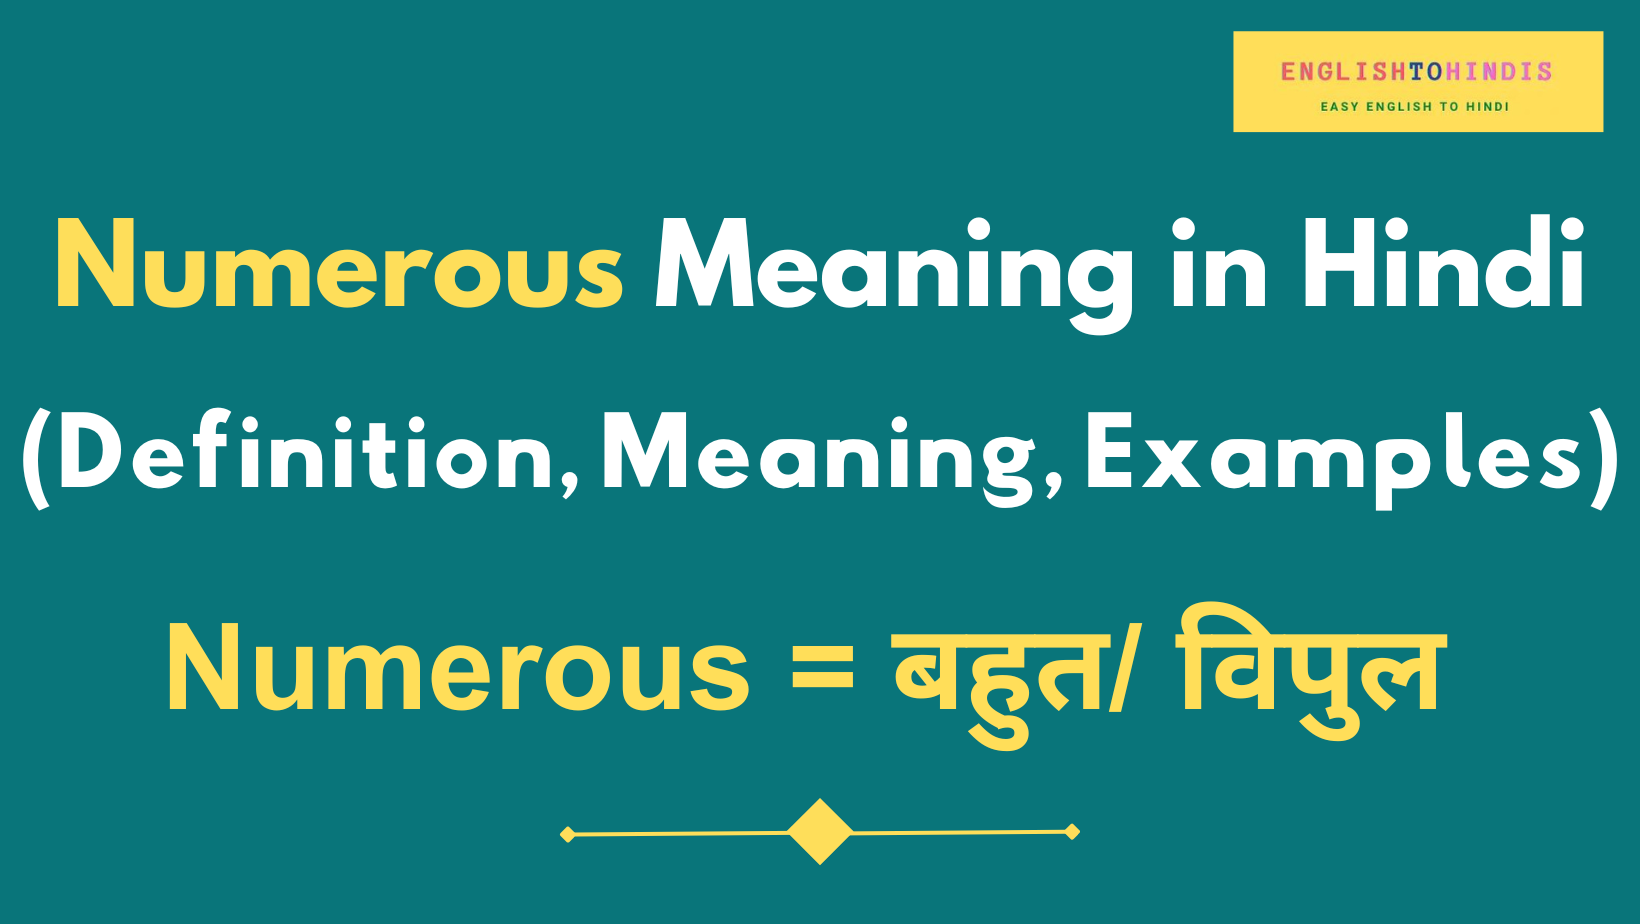 Numerous Meaning in Hindi